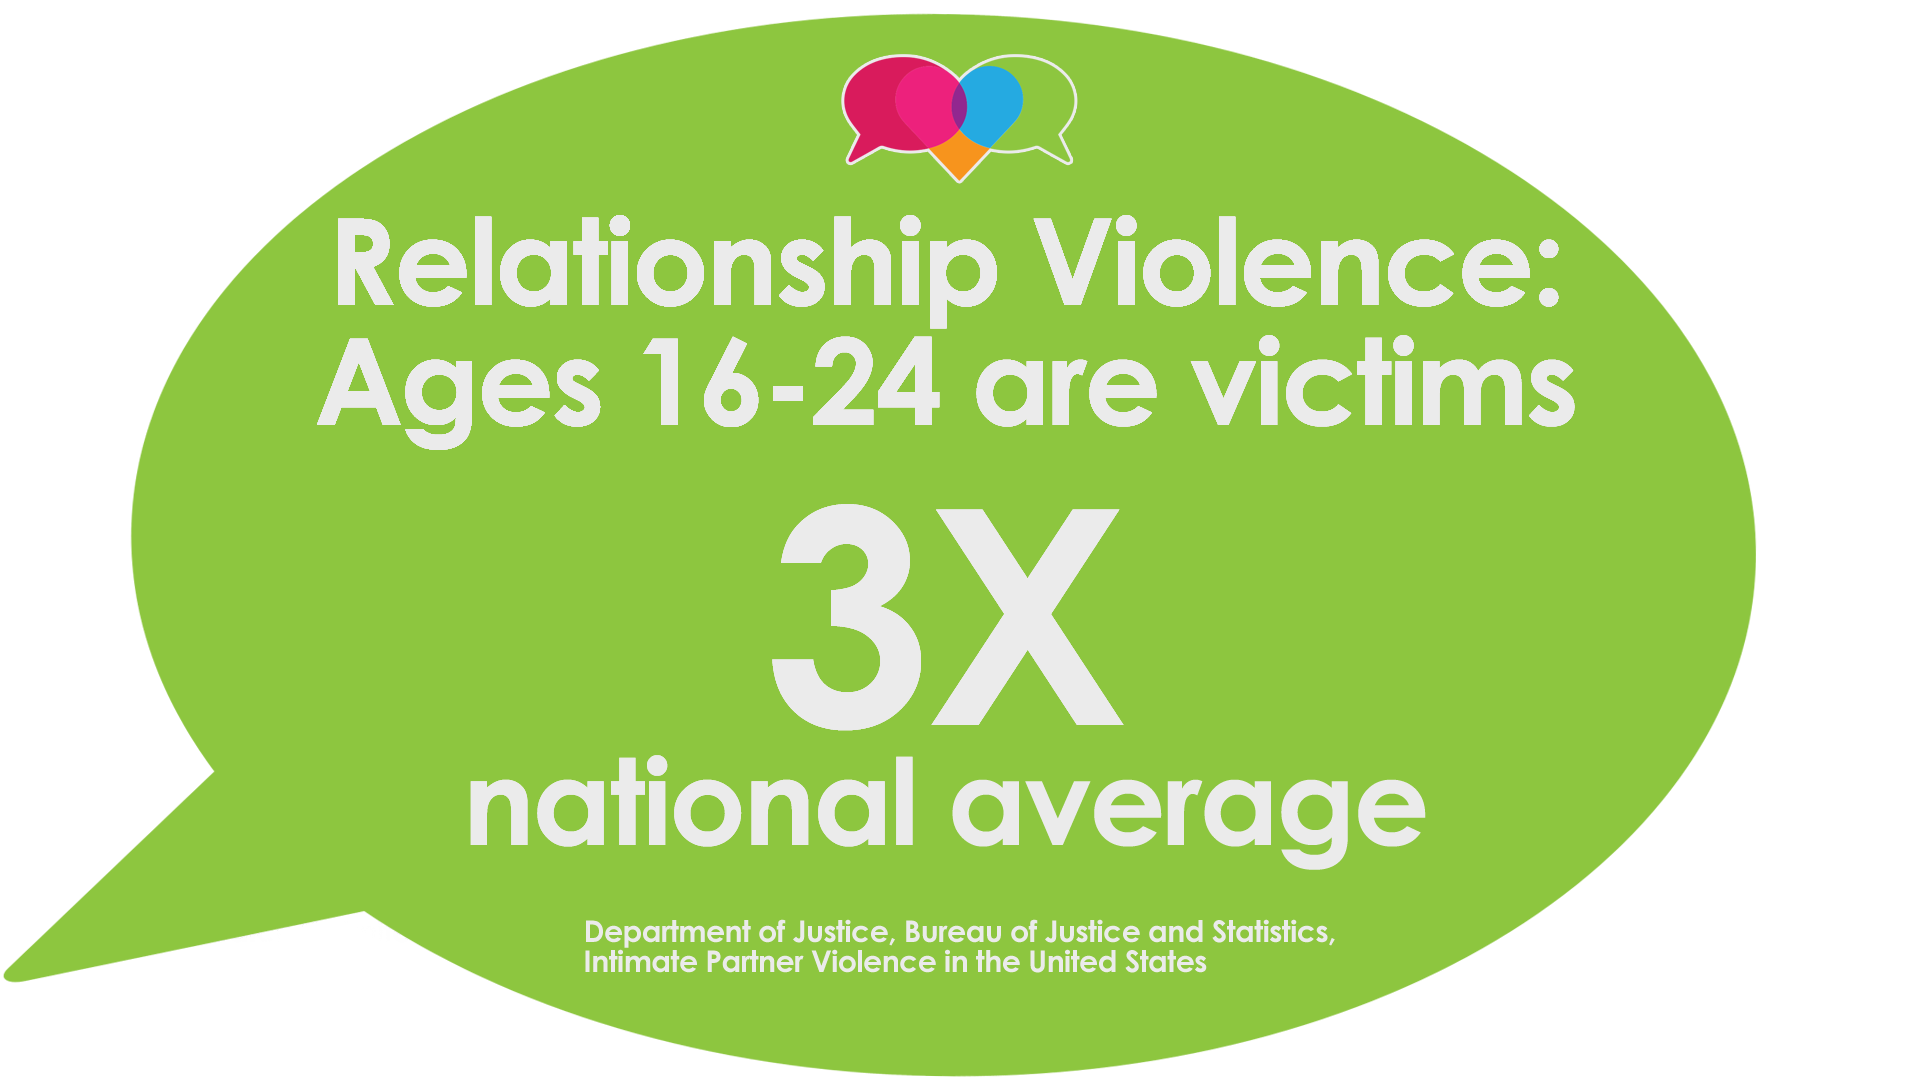 Relationship Violence: Ages 16-24 are victims three times the national average